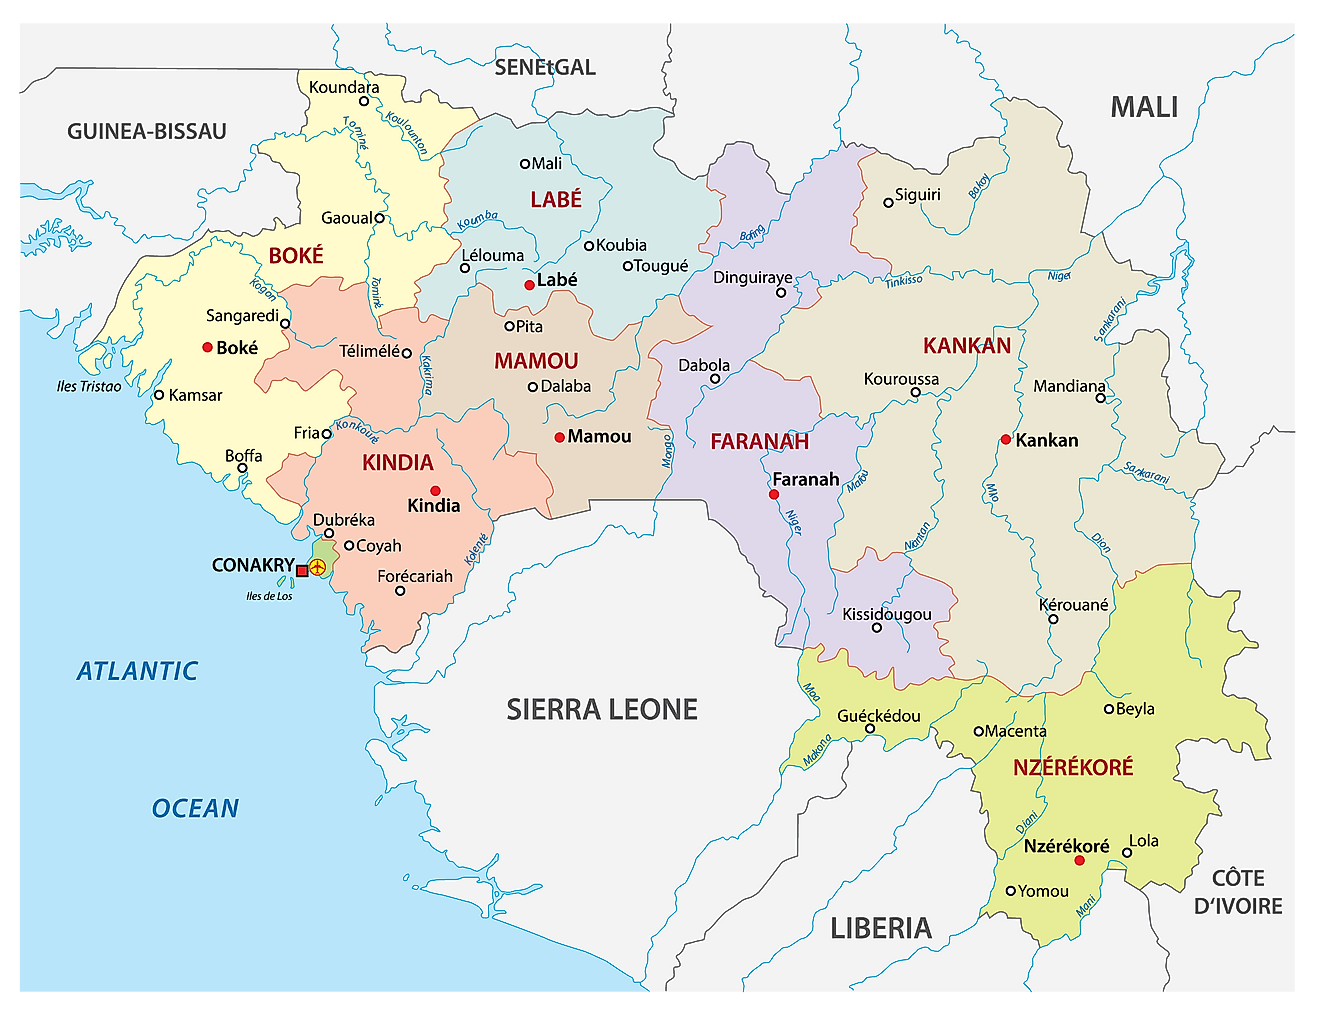 Political Map of Guinea showing the seven administrative regions, their capitals, and the national capital of Conakry.